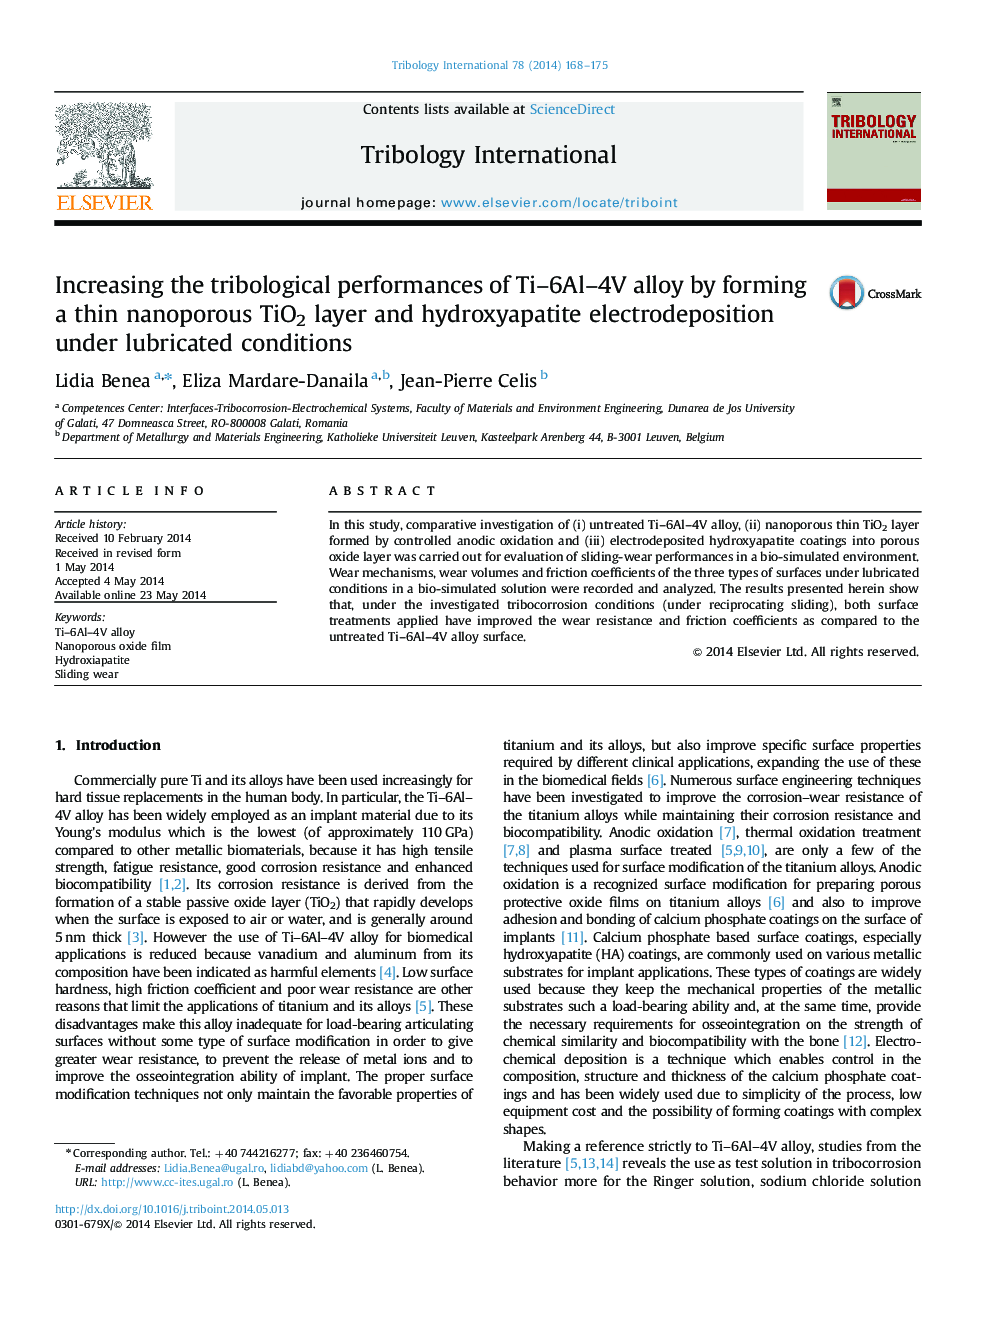 Increasing the tribological performances of Ti-6Al-4V alloy by forming a thin nanoporous TiO2 layer and hydroxyapatite electrodeposition under lubricated conditions